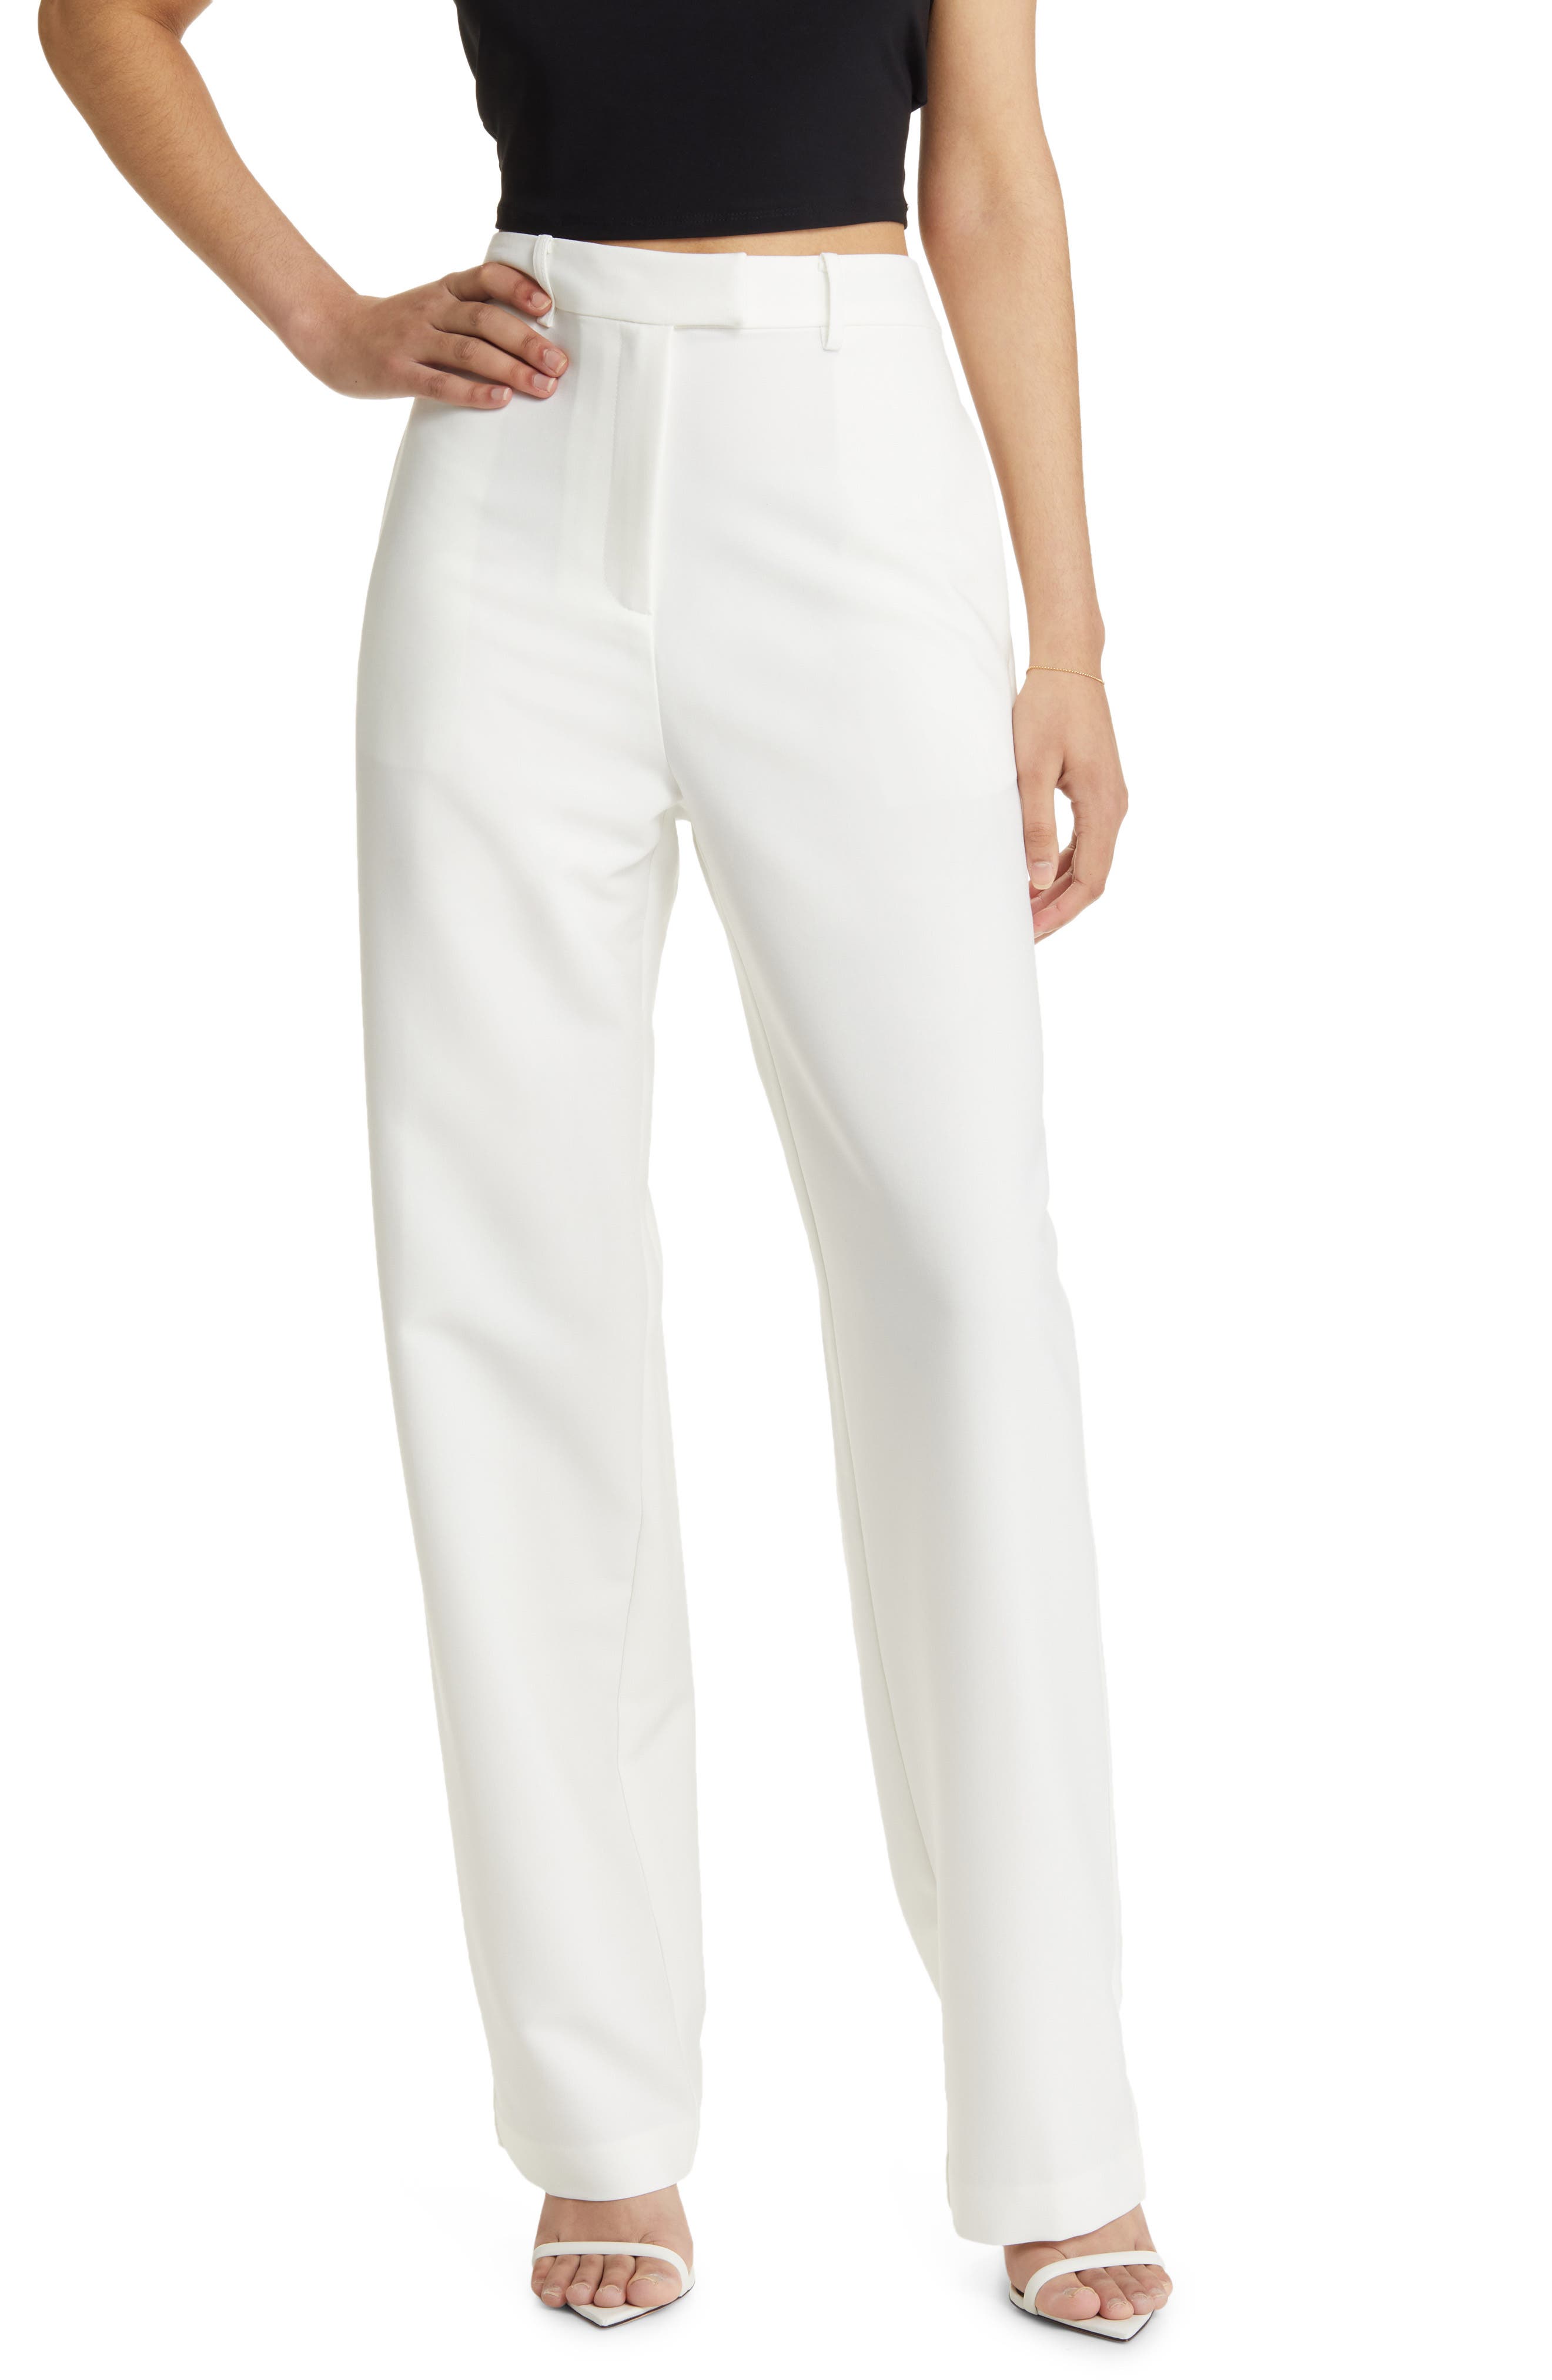 White Trousers - Also find stylish jeans for women - VENDERBY'S-anthinhphatland.vn